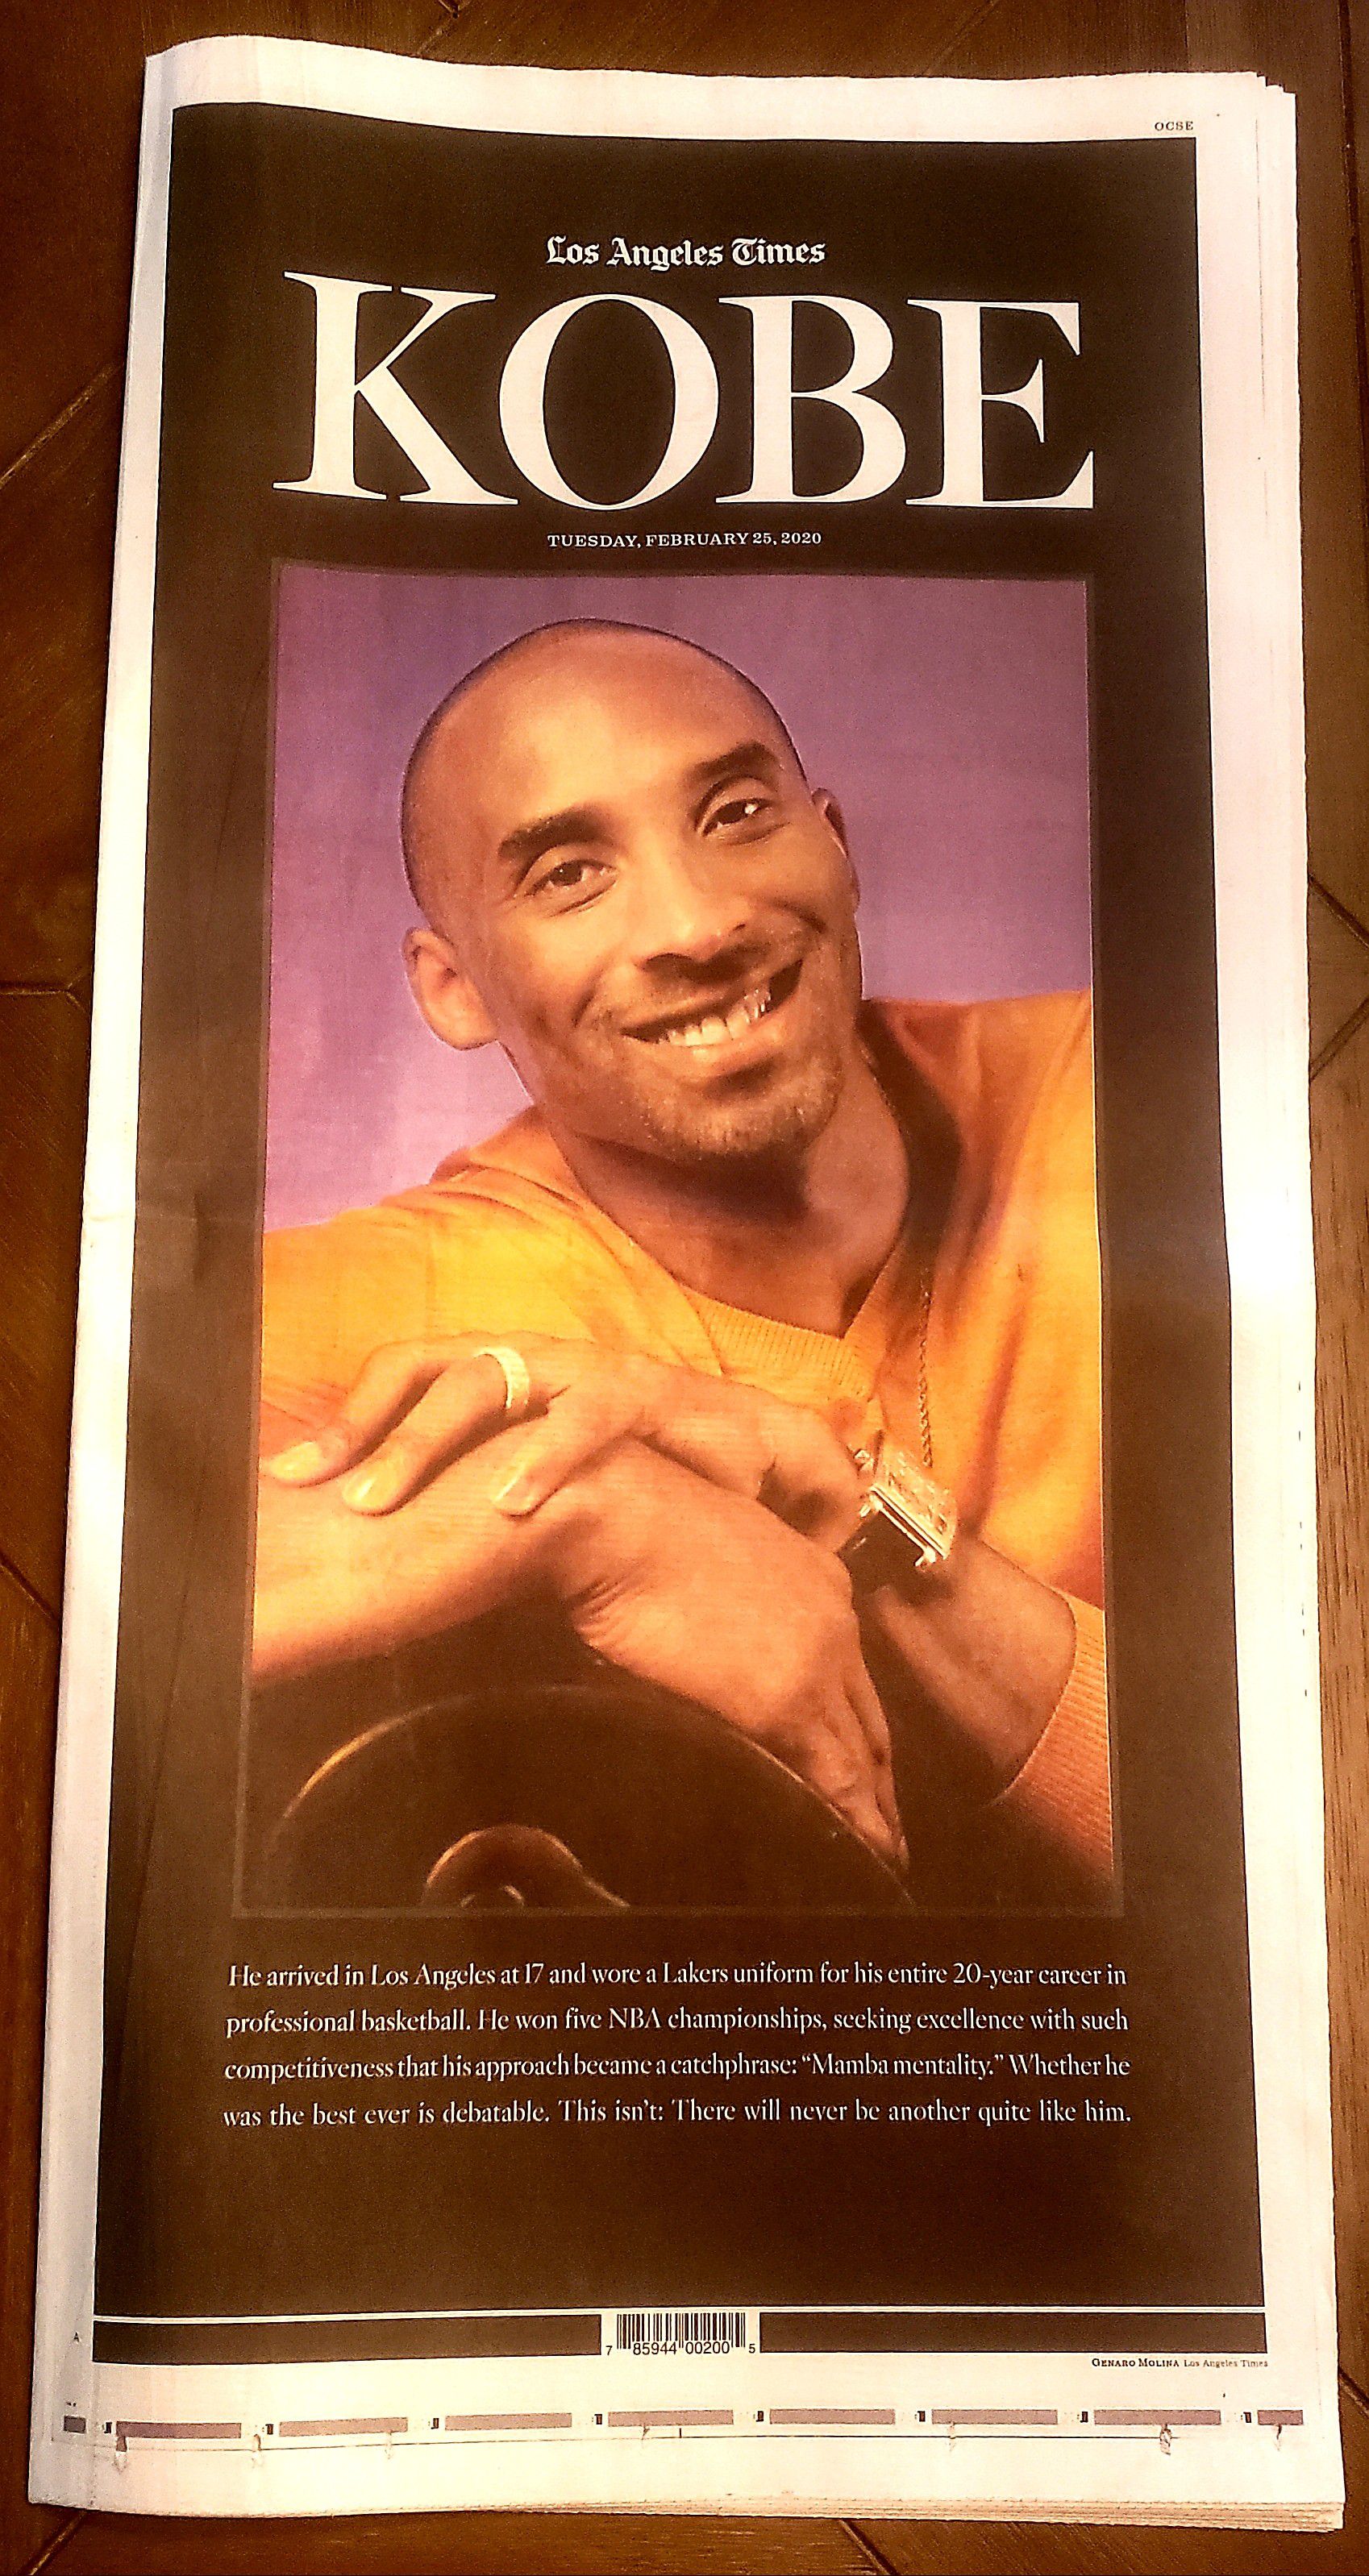 2/25/20 LA Times Newspaper Kobe Bryant Memorial Celebration Service w/ Special 24 Page Tribute Edition Lakers